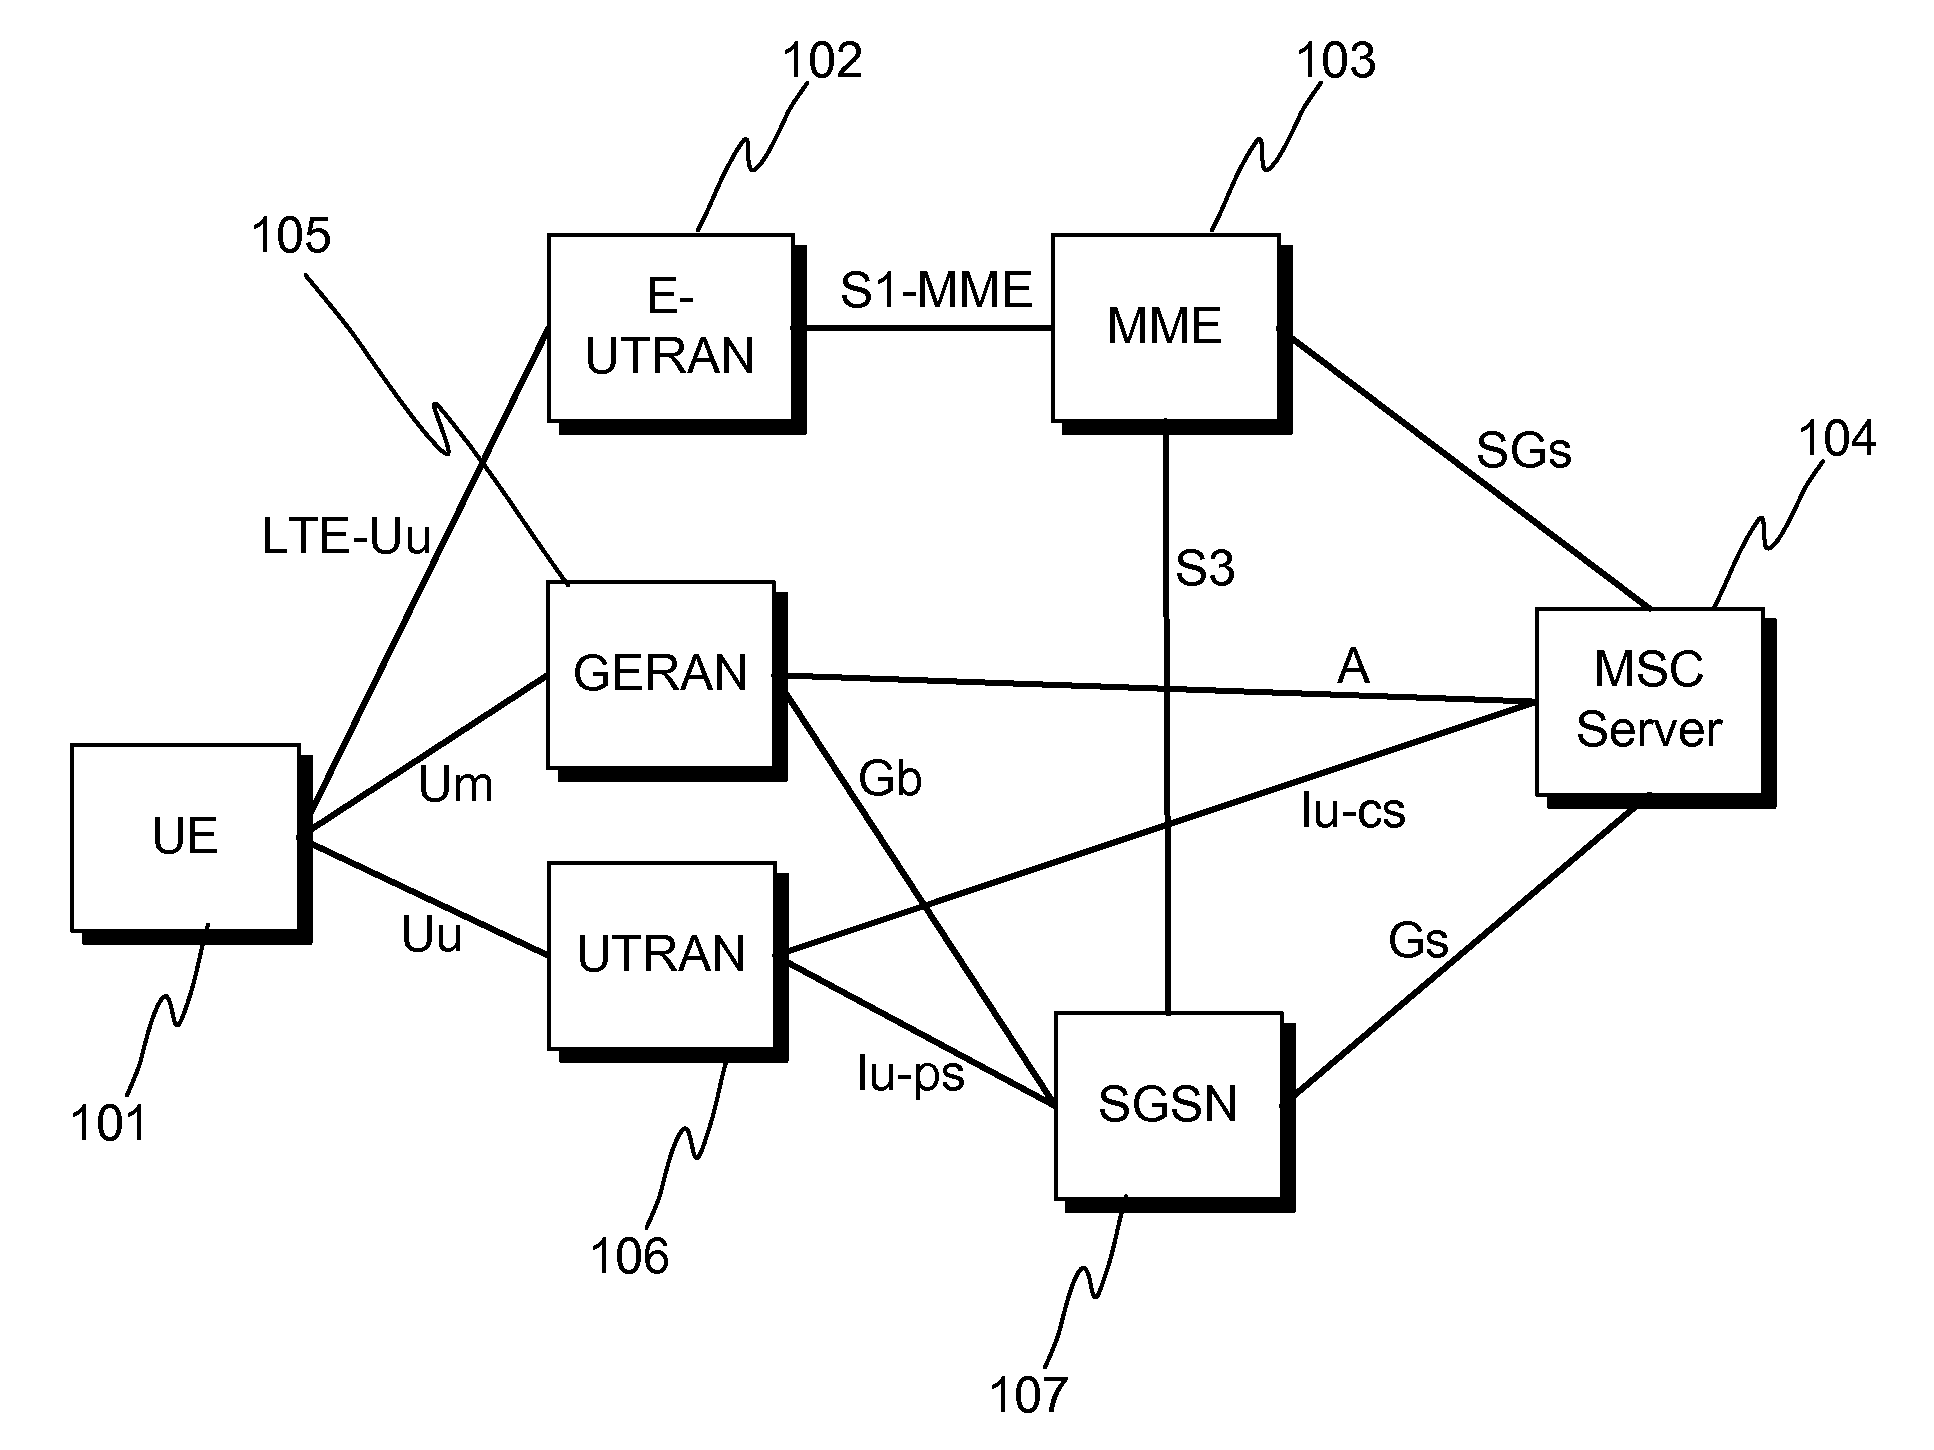 Network selection in a shared network environment